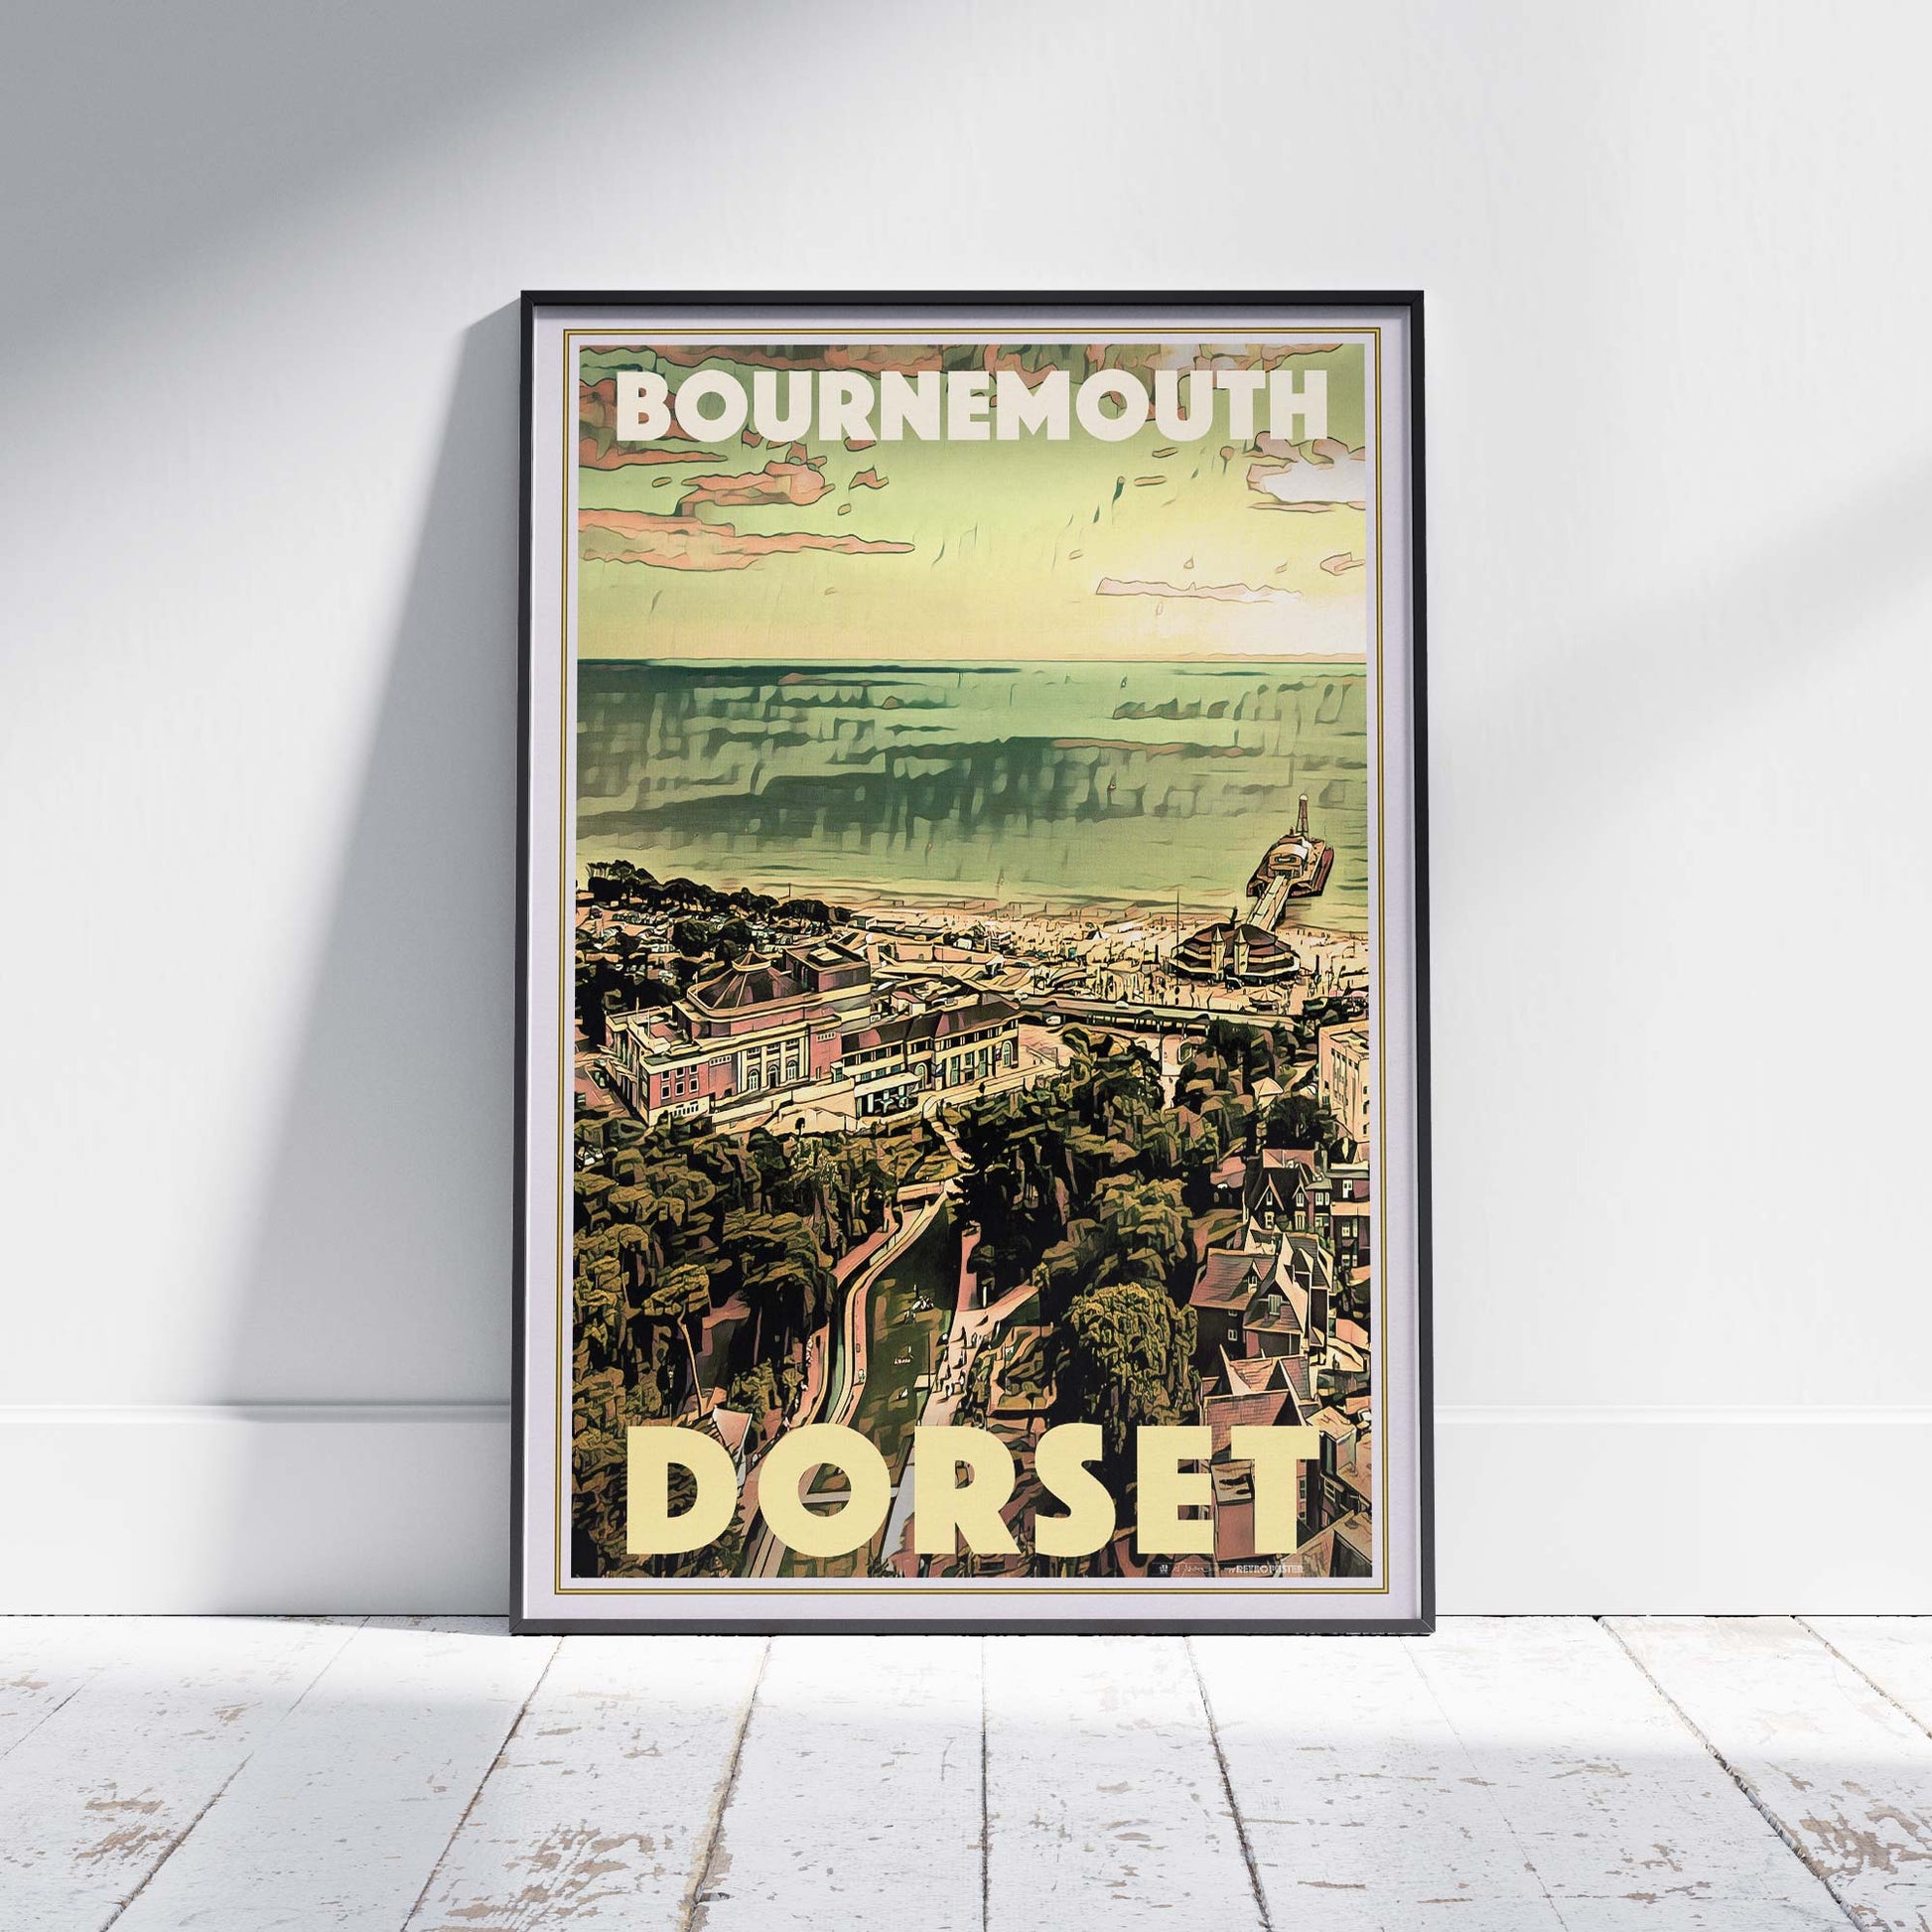 Bournemouth poster by Alecse